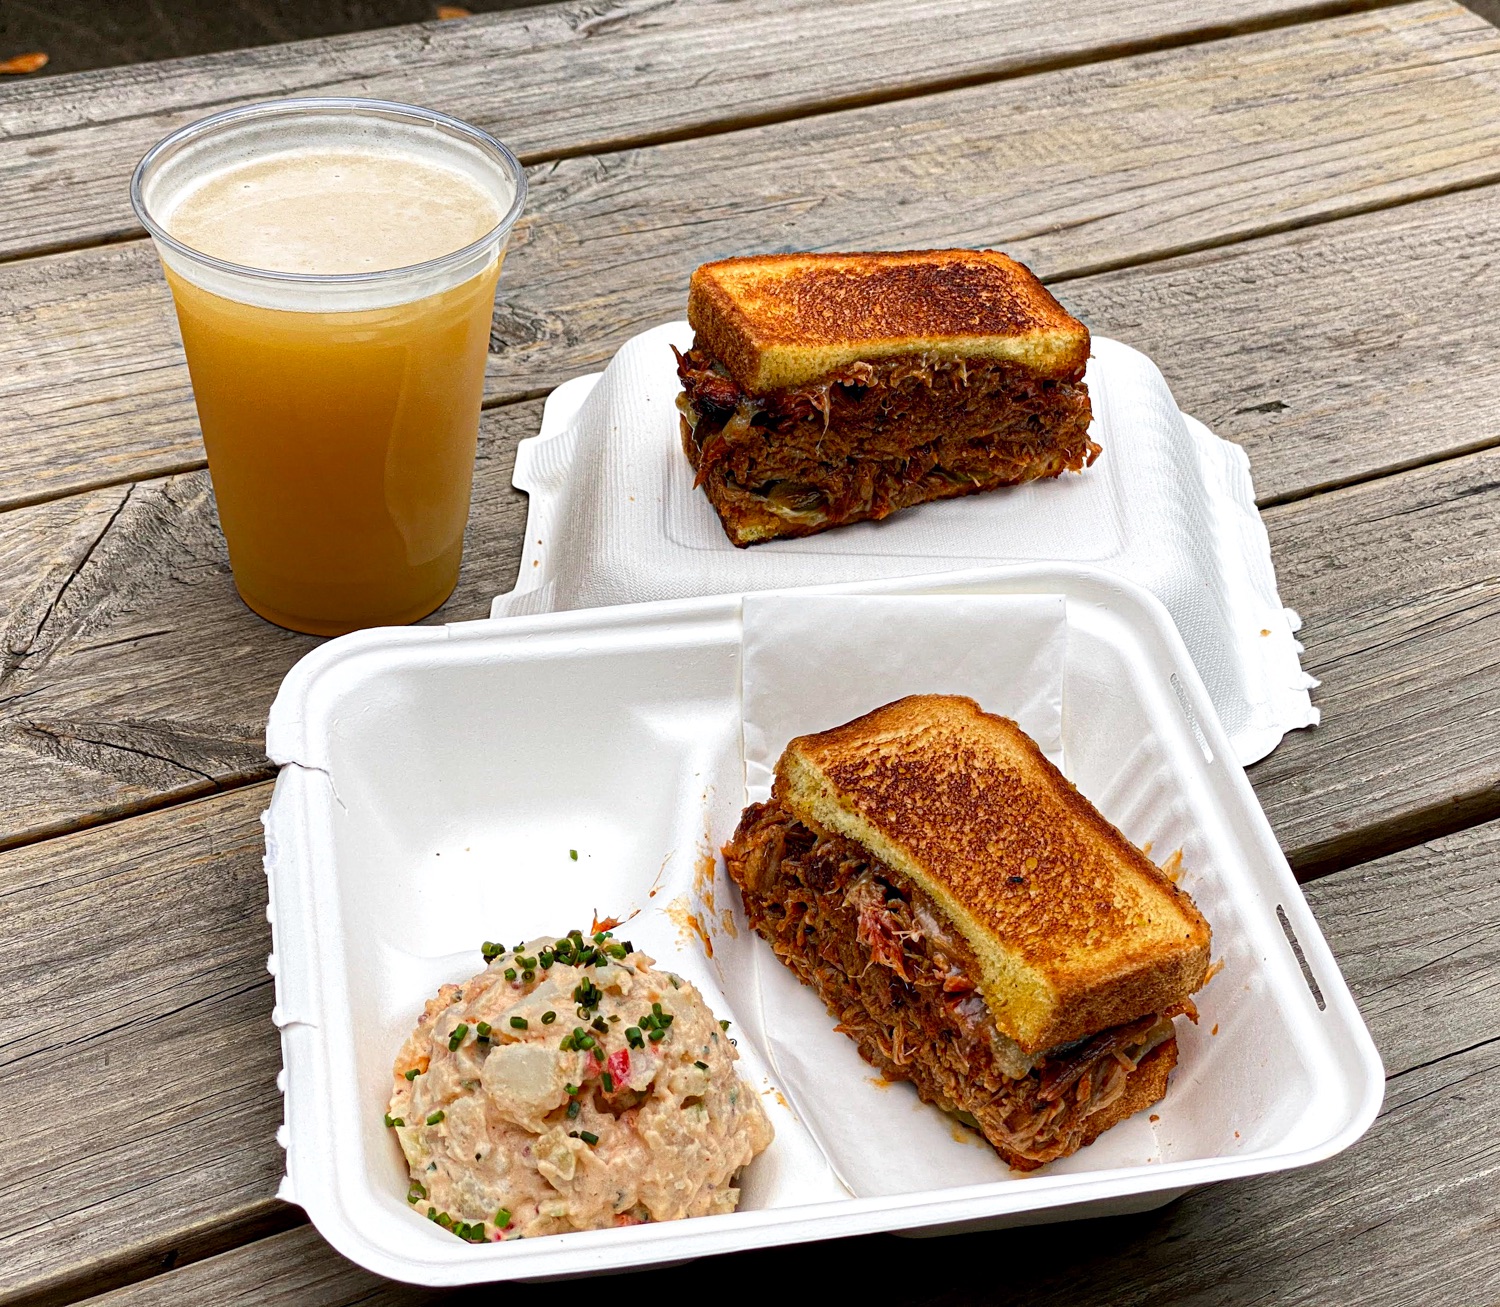 The Porky Melt at The Dinner Bell Barbecue Food Cart – A Culinary Treasure! Culinary Treasure Network Steven Shomler 